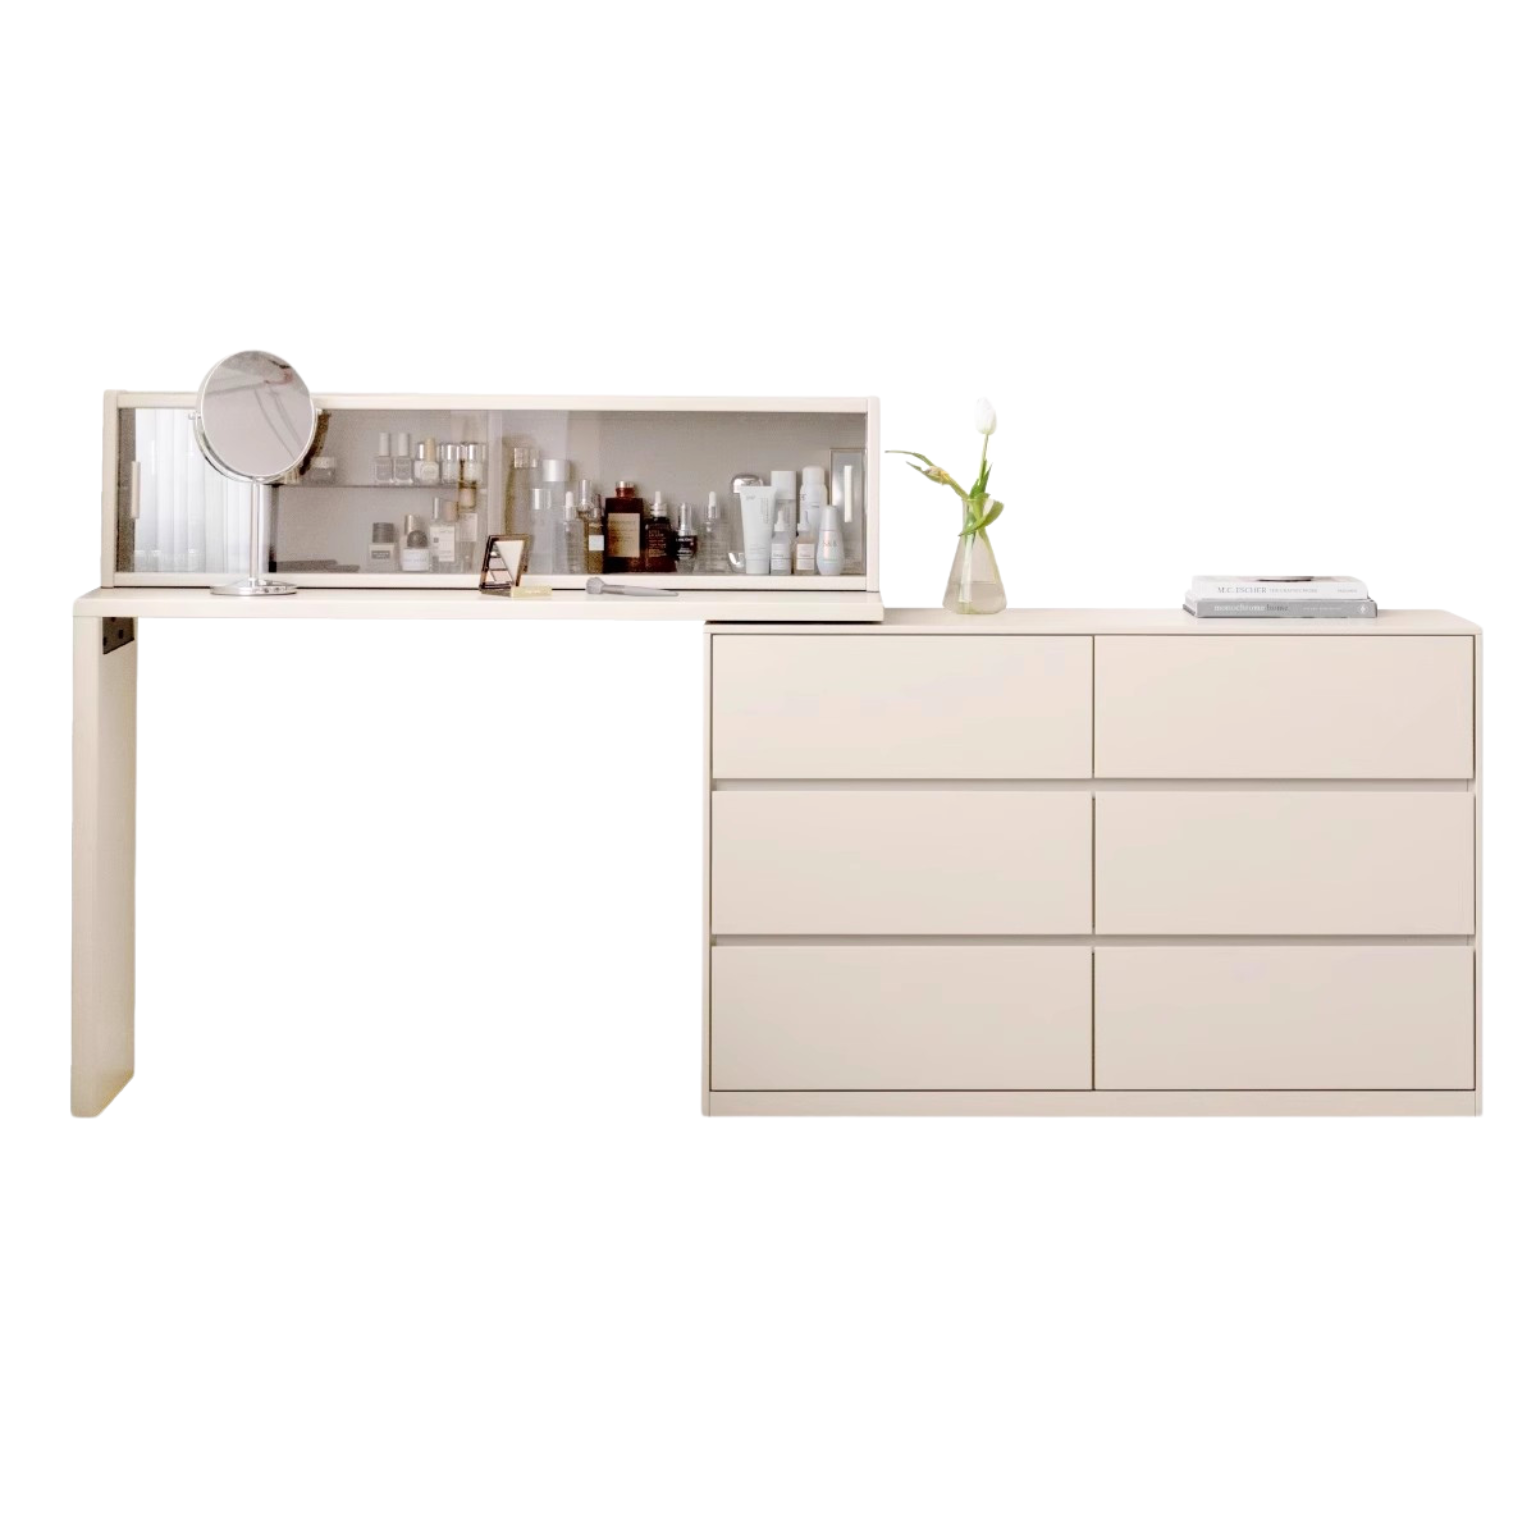 Poplar solid wood dressing table cream style integrated simple drawer: